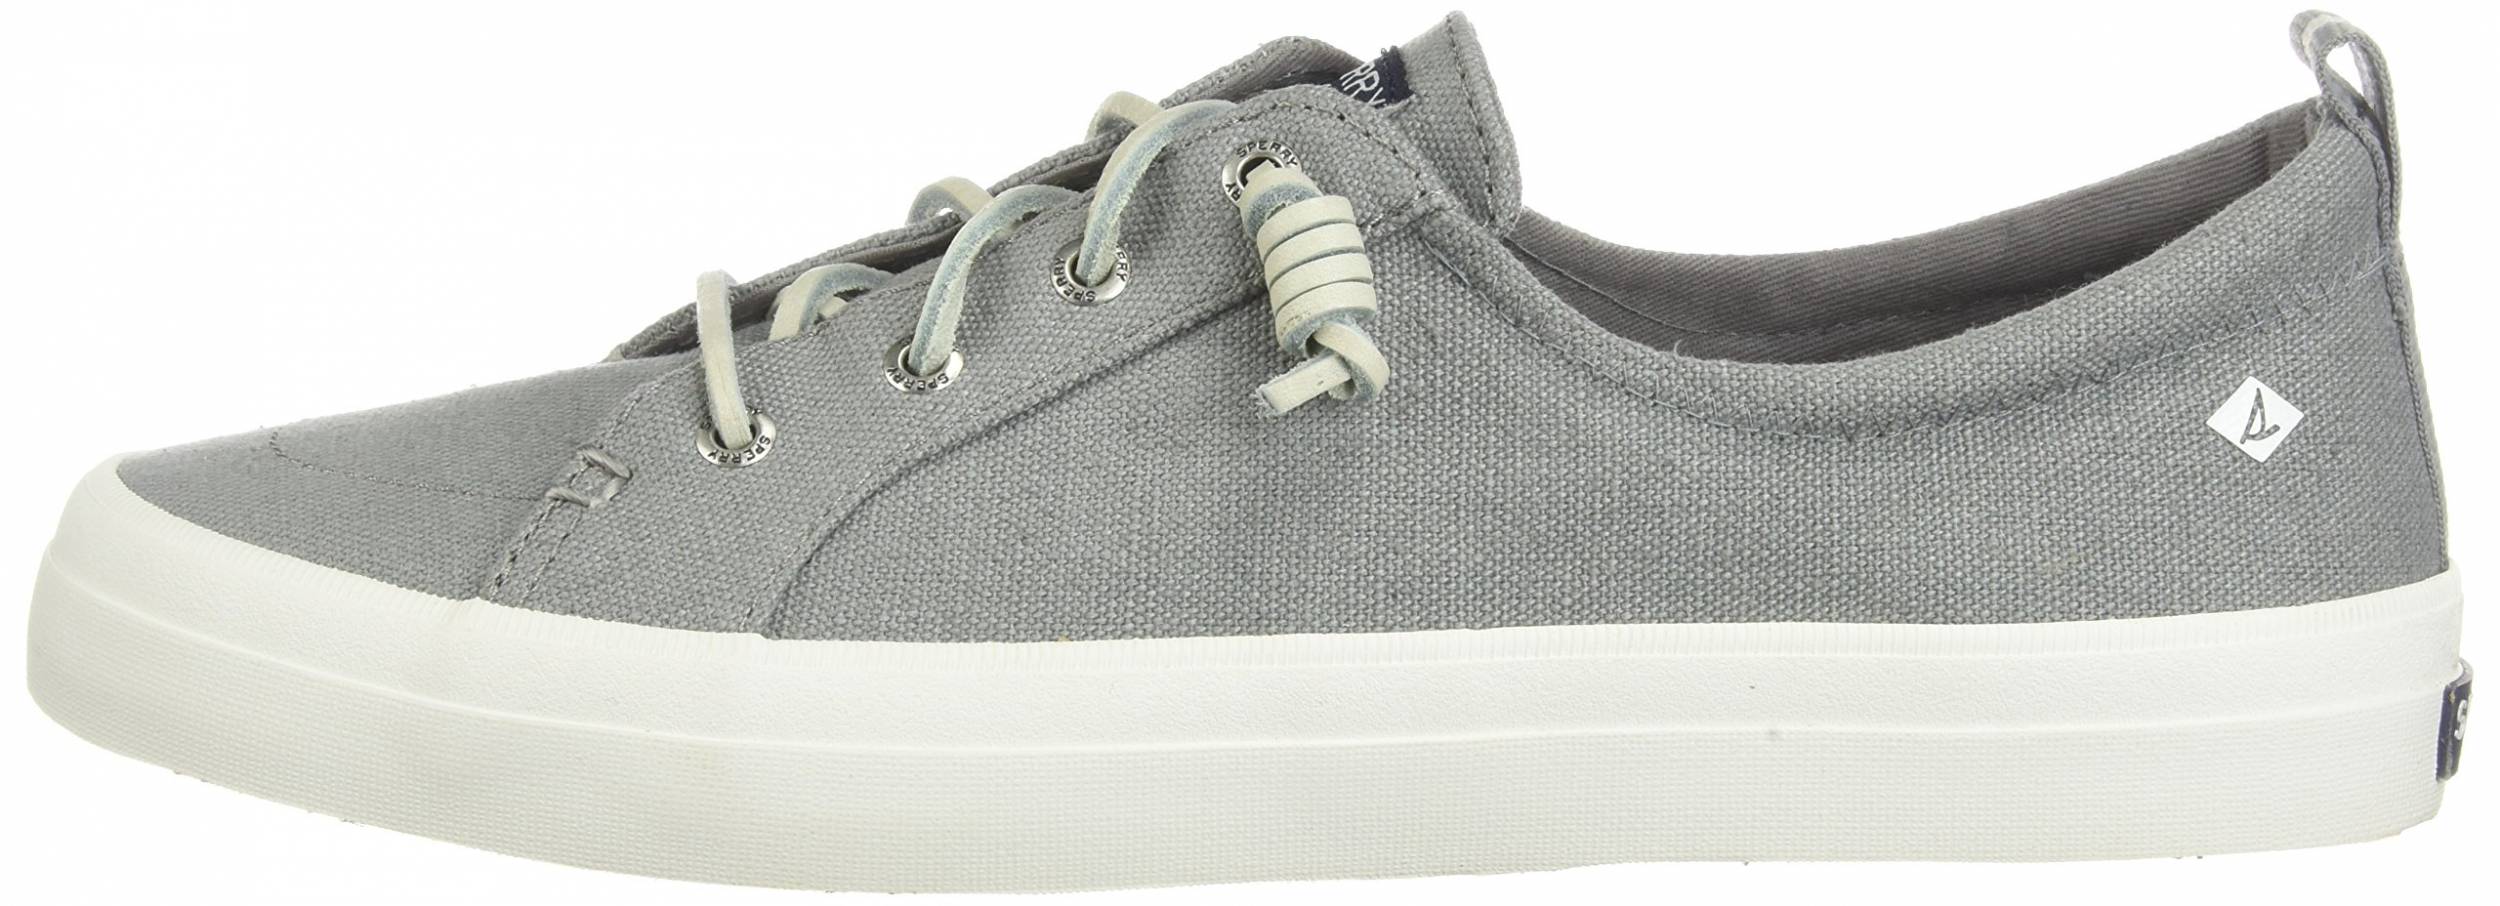 sperry crest vibe canvas